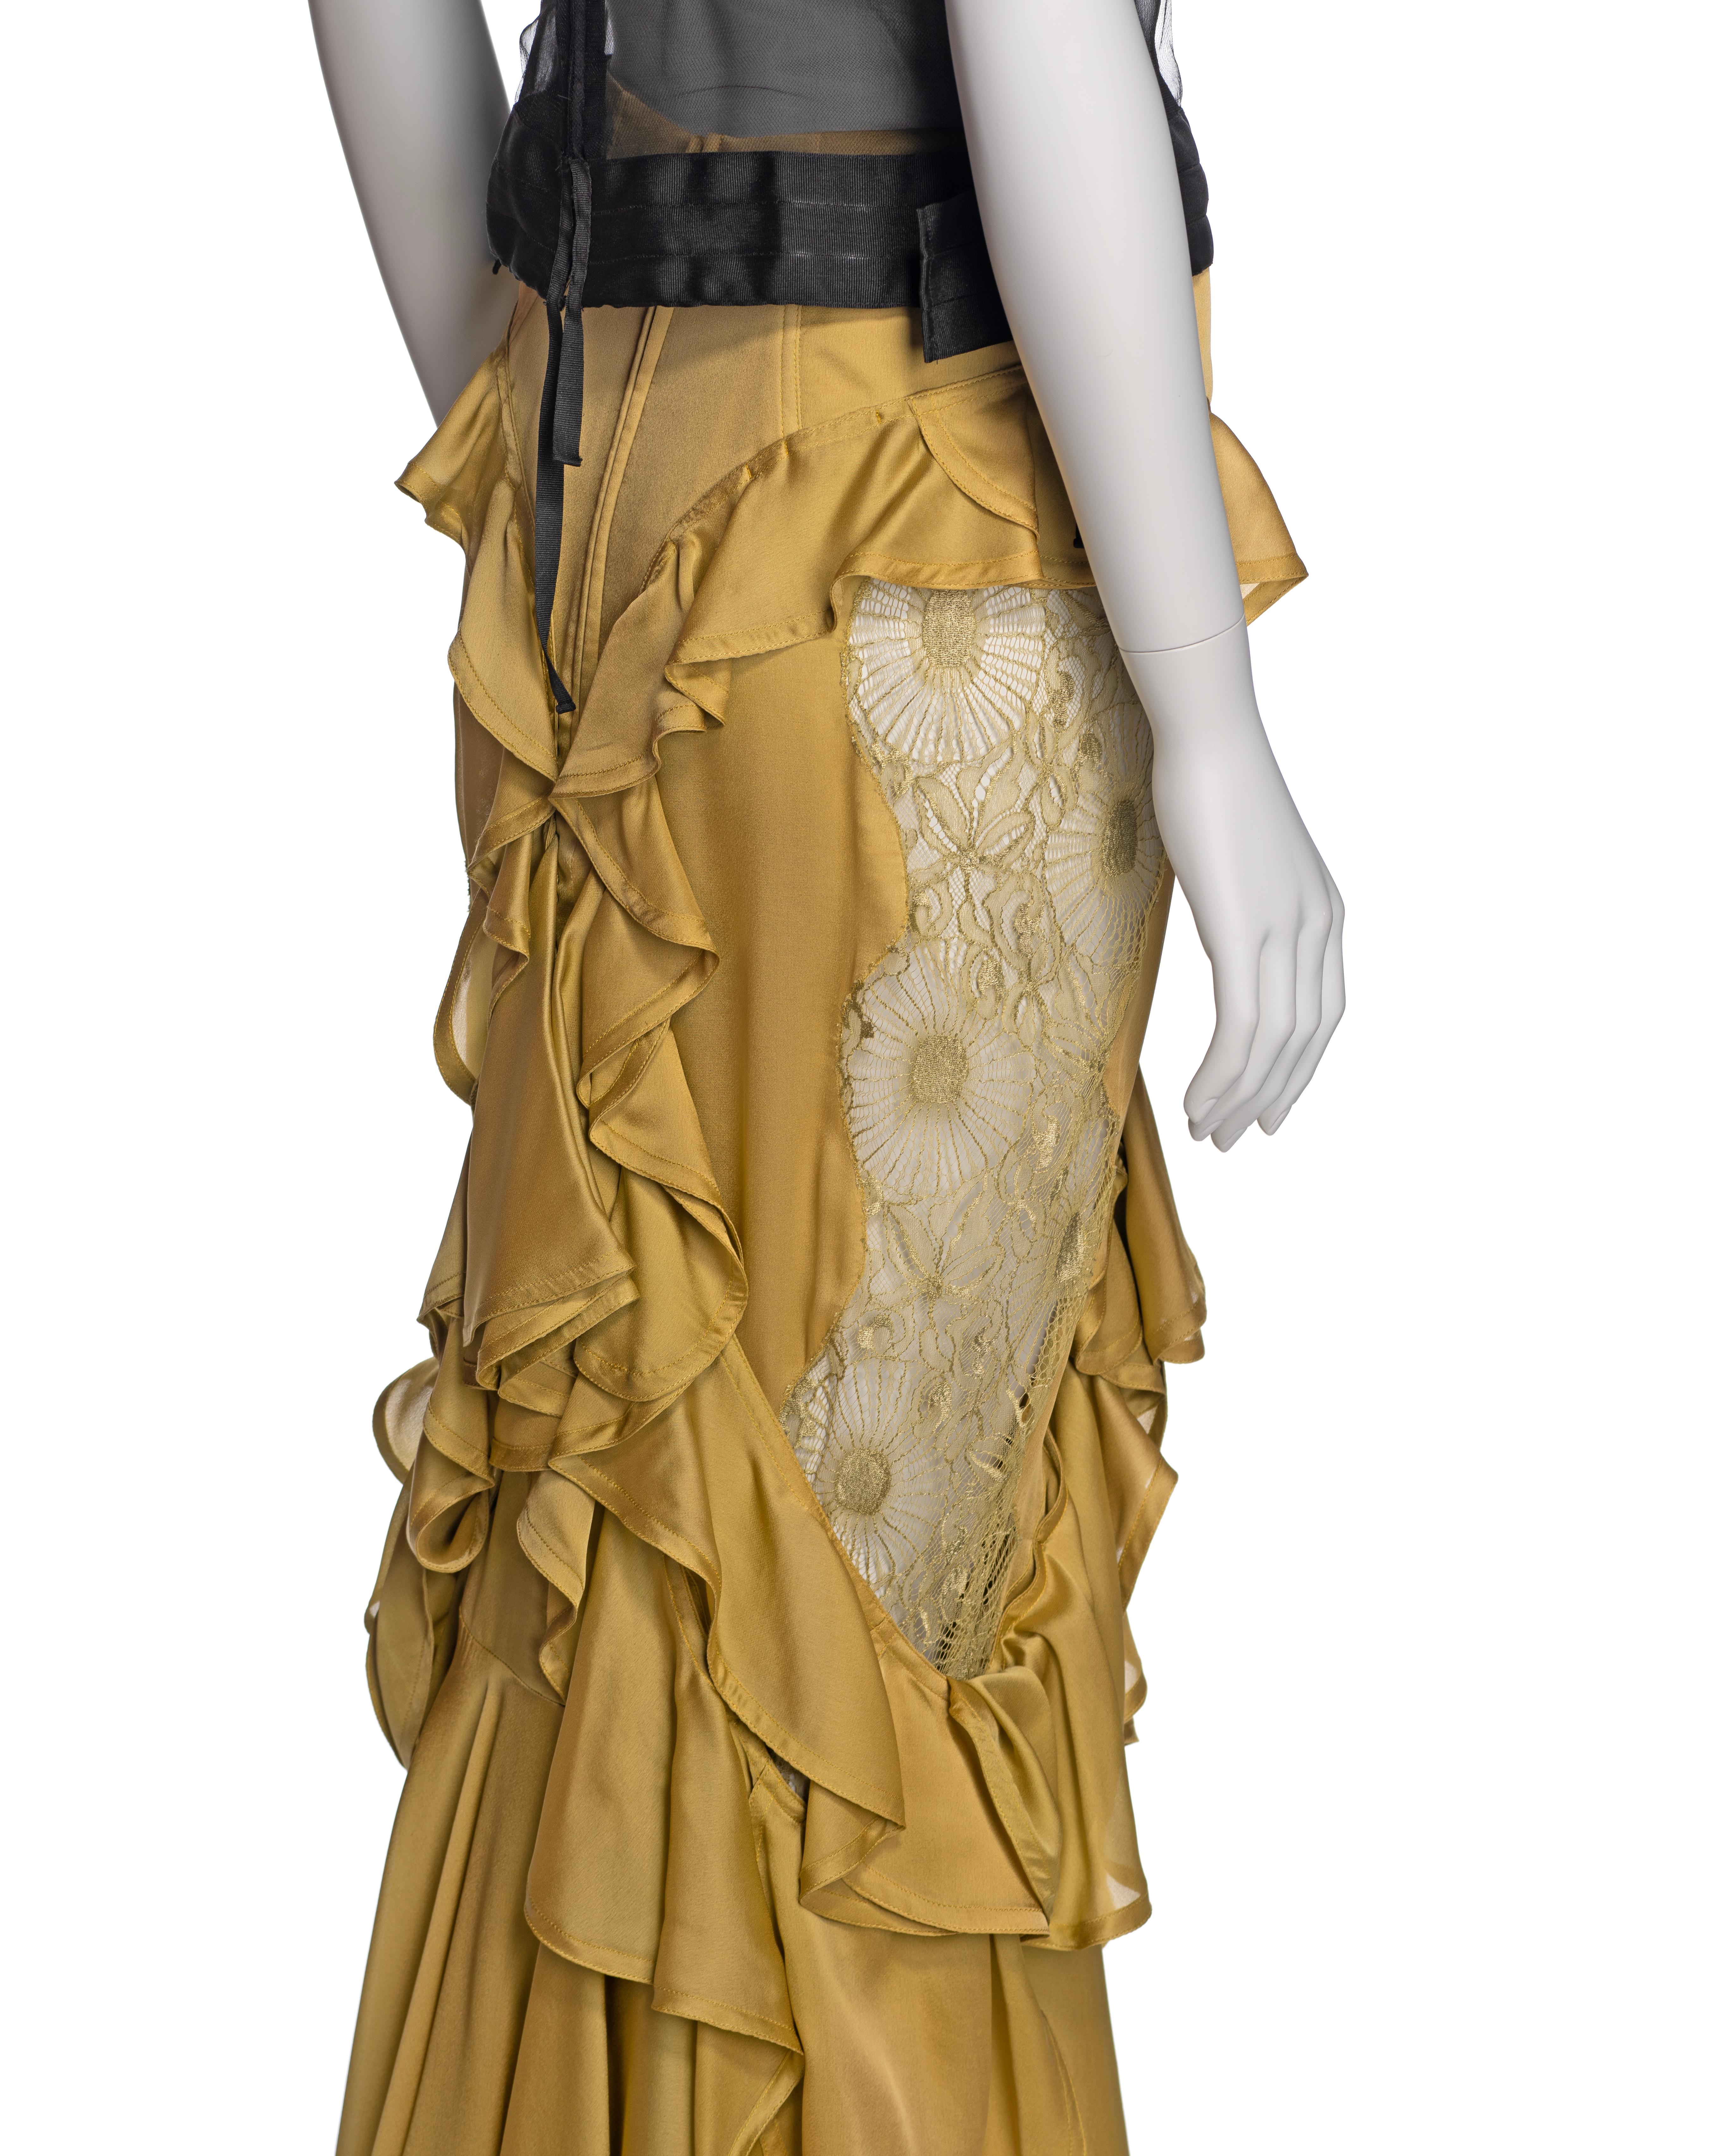 Yves Saint Laurent by Tom Ford Embellished Top and Silk Skirt Ensemble, FW 2003 For Sale 7